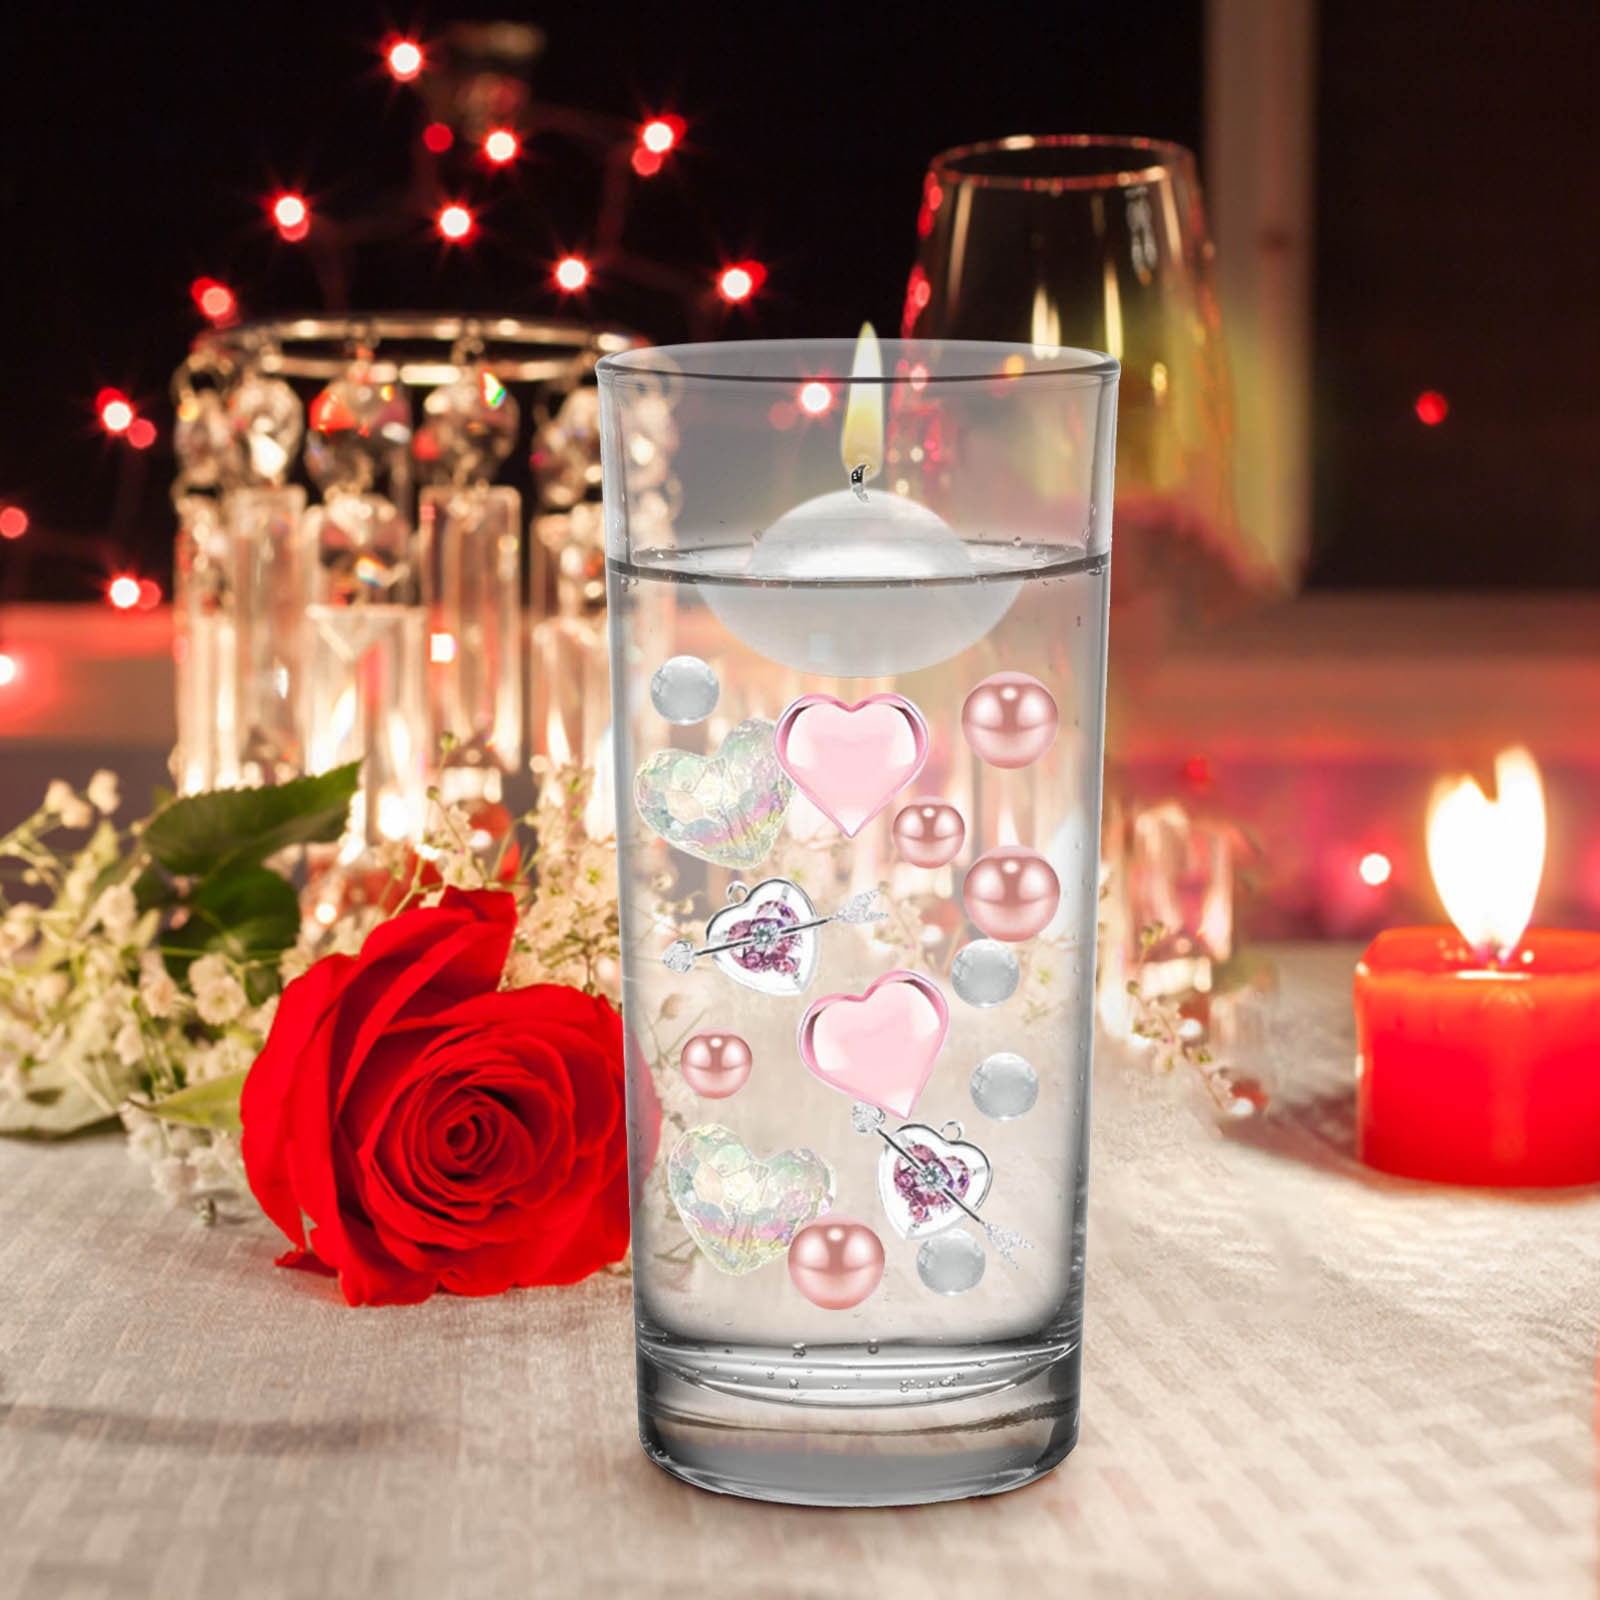 Valentines Day Vase Filler Pearl For Vase Candyland Pearls Water Gels Beads  Floating Candles Centerpiece For Valentine Party